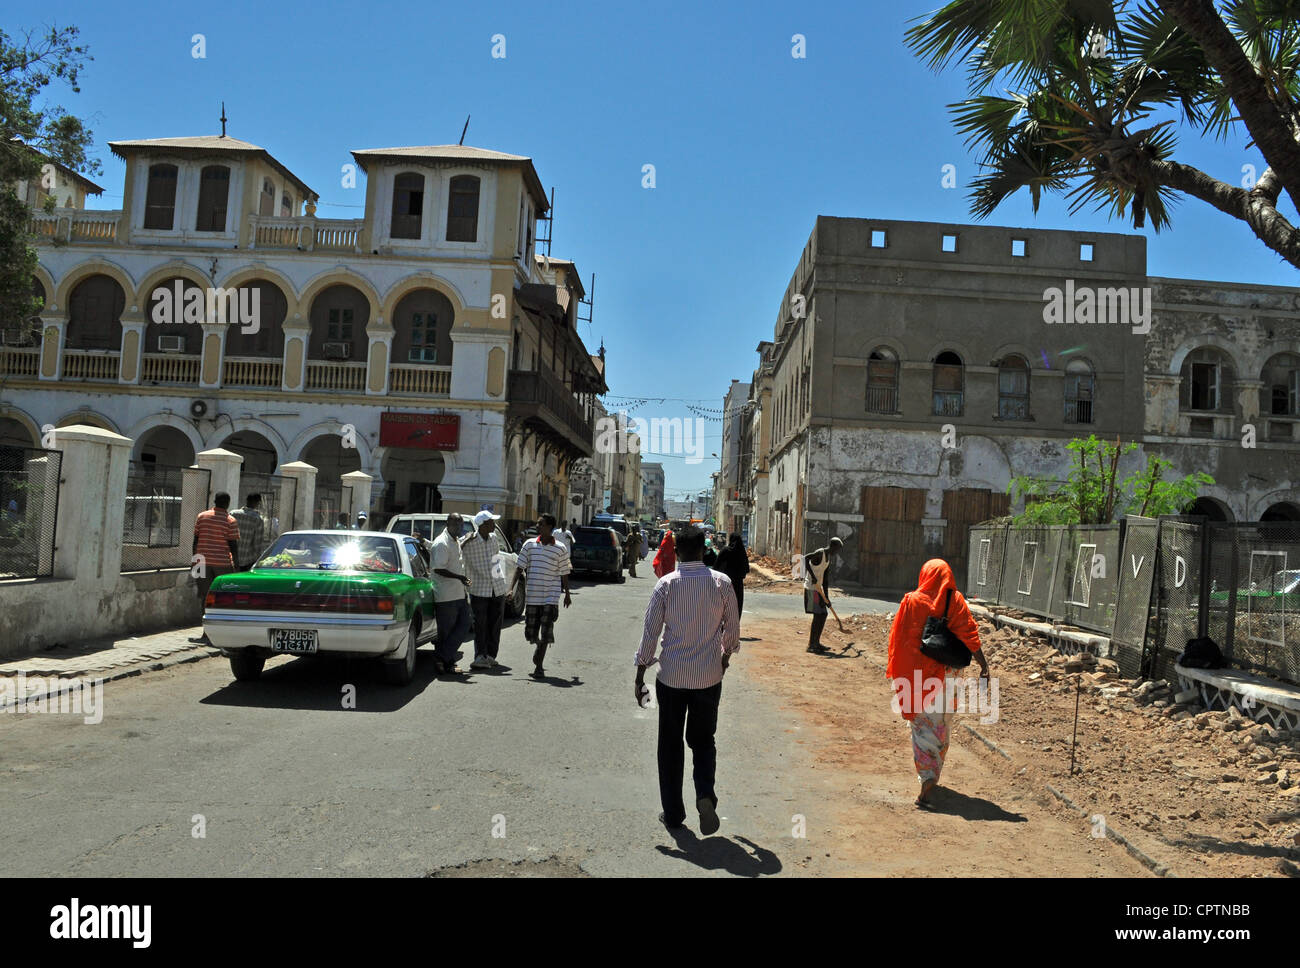 Local people walking down a road in a street scene in Djibouti City, east Africa. Stock Photo